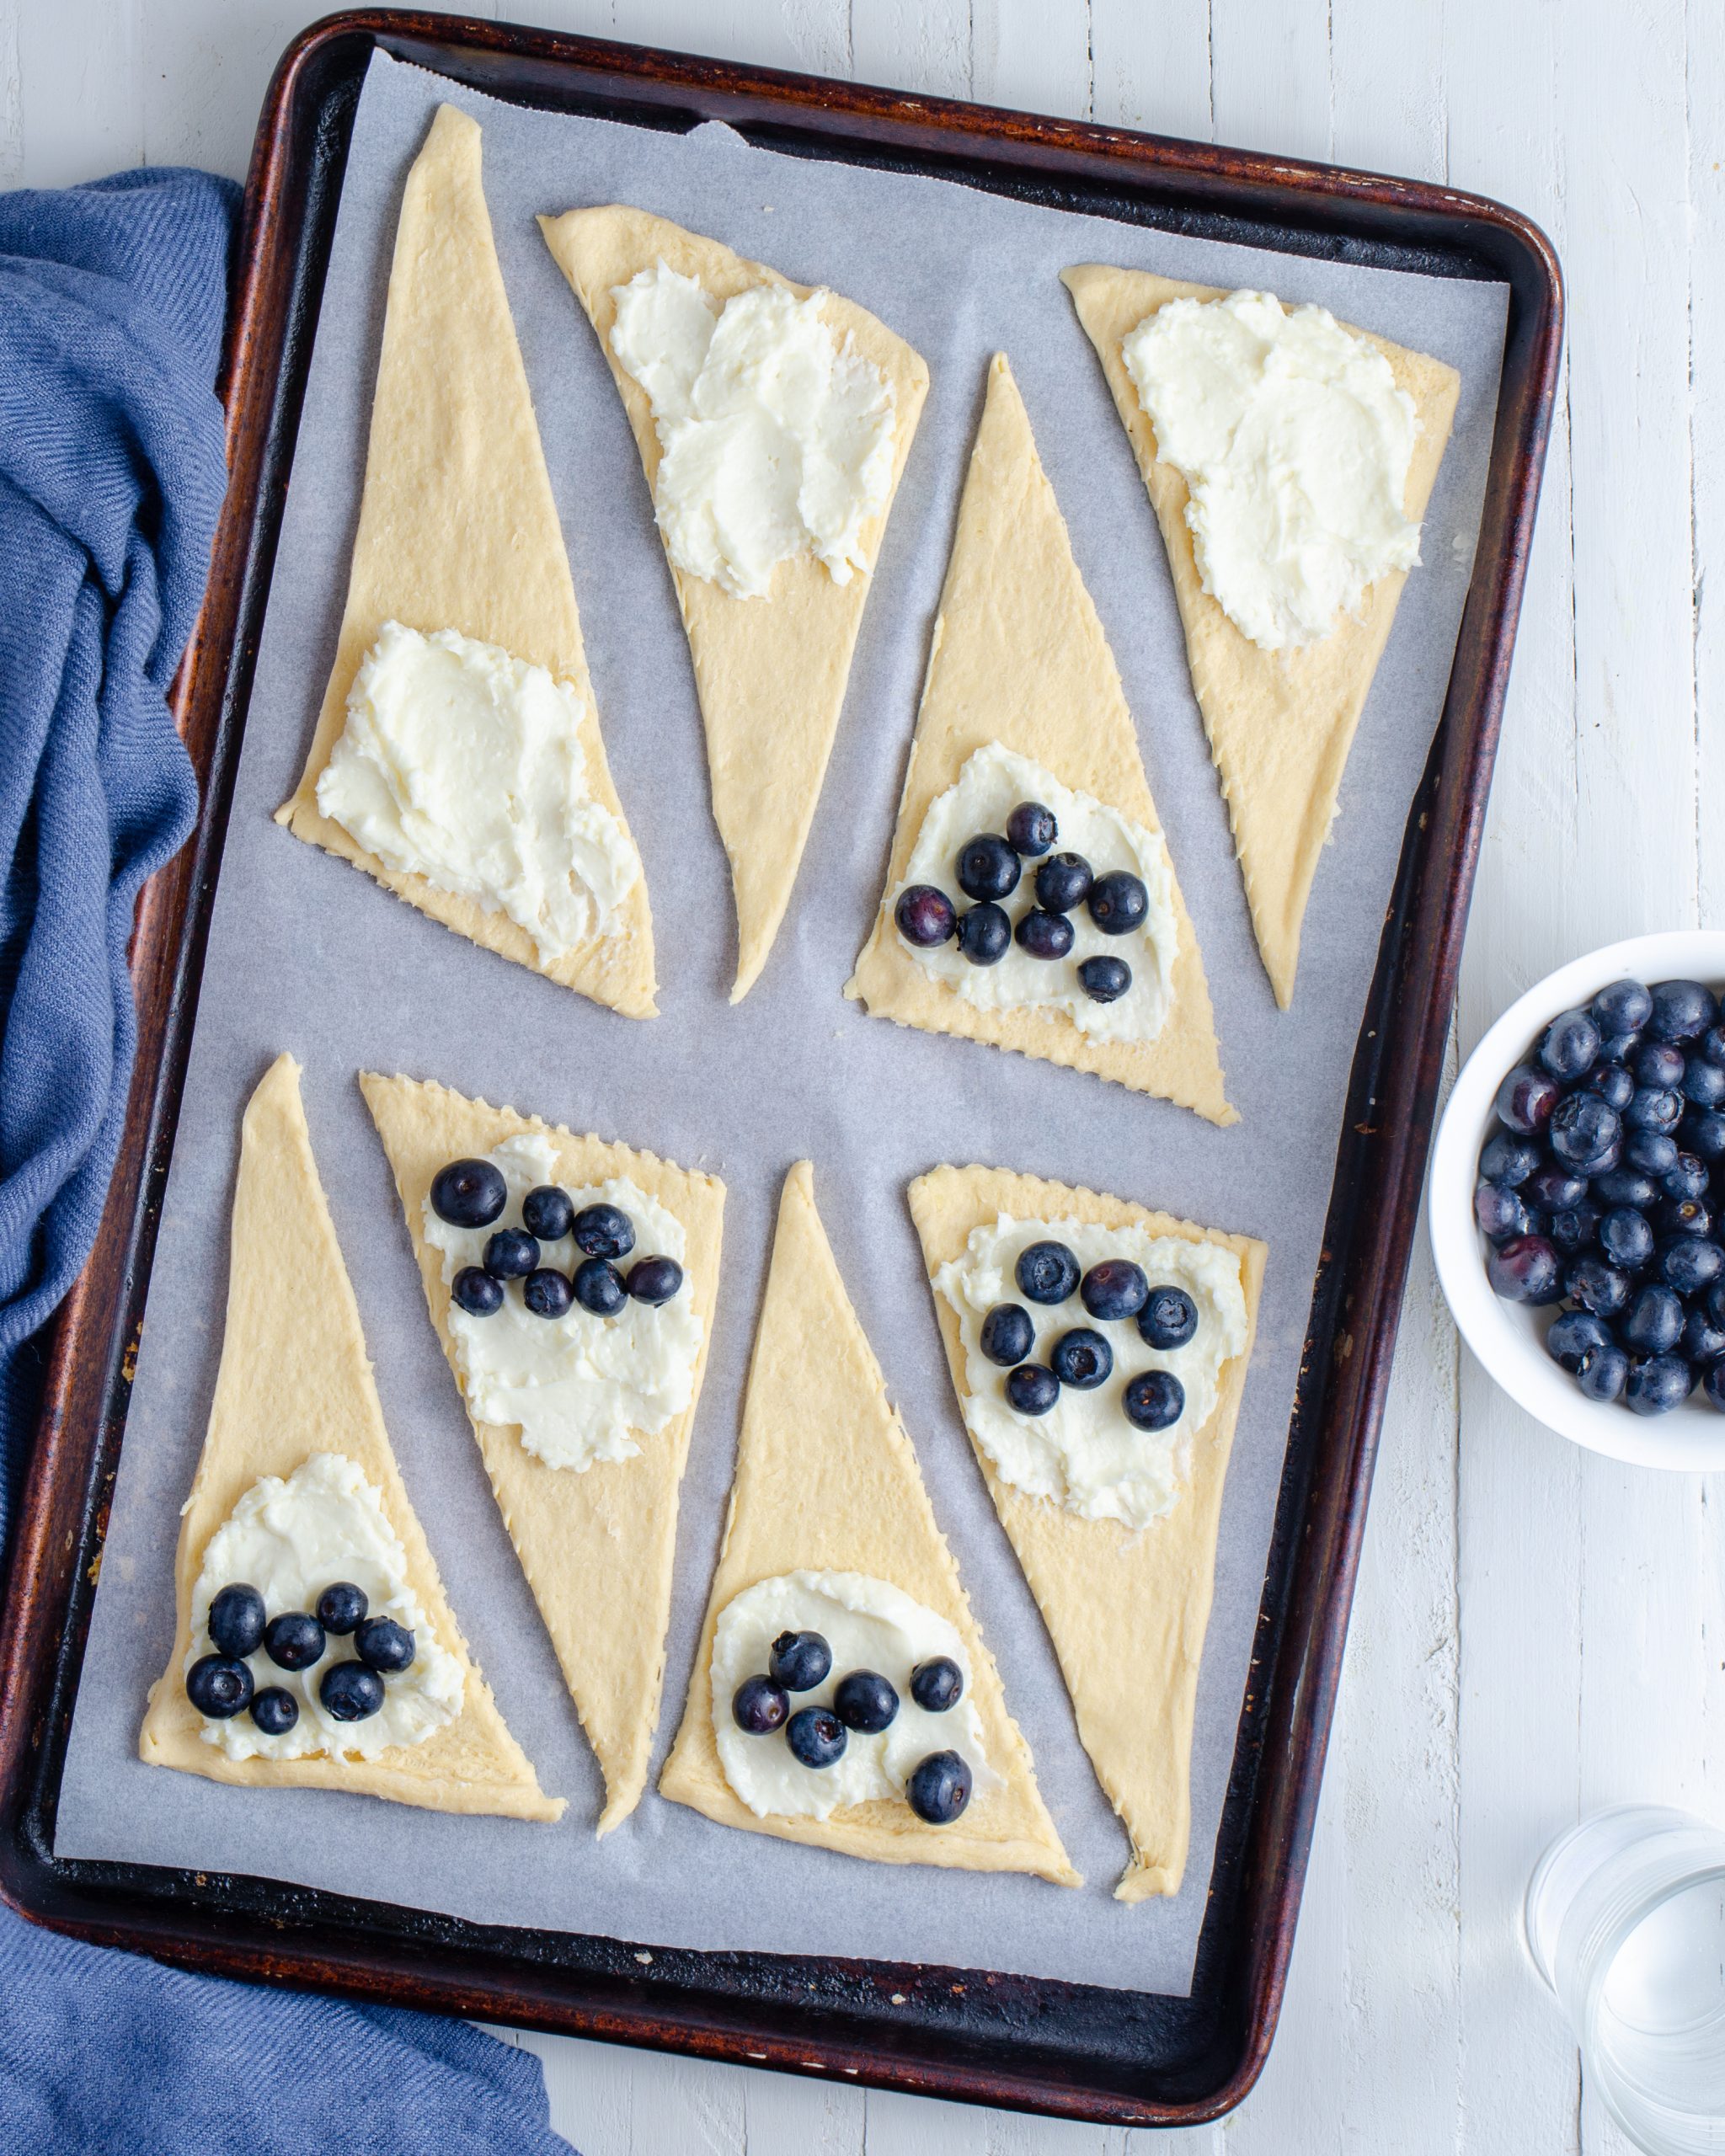 Add a teaspoon of the filling mixture to the wider end of each crescent roll along with some of the fresh blueberries. 